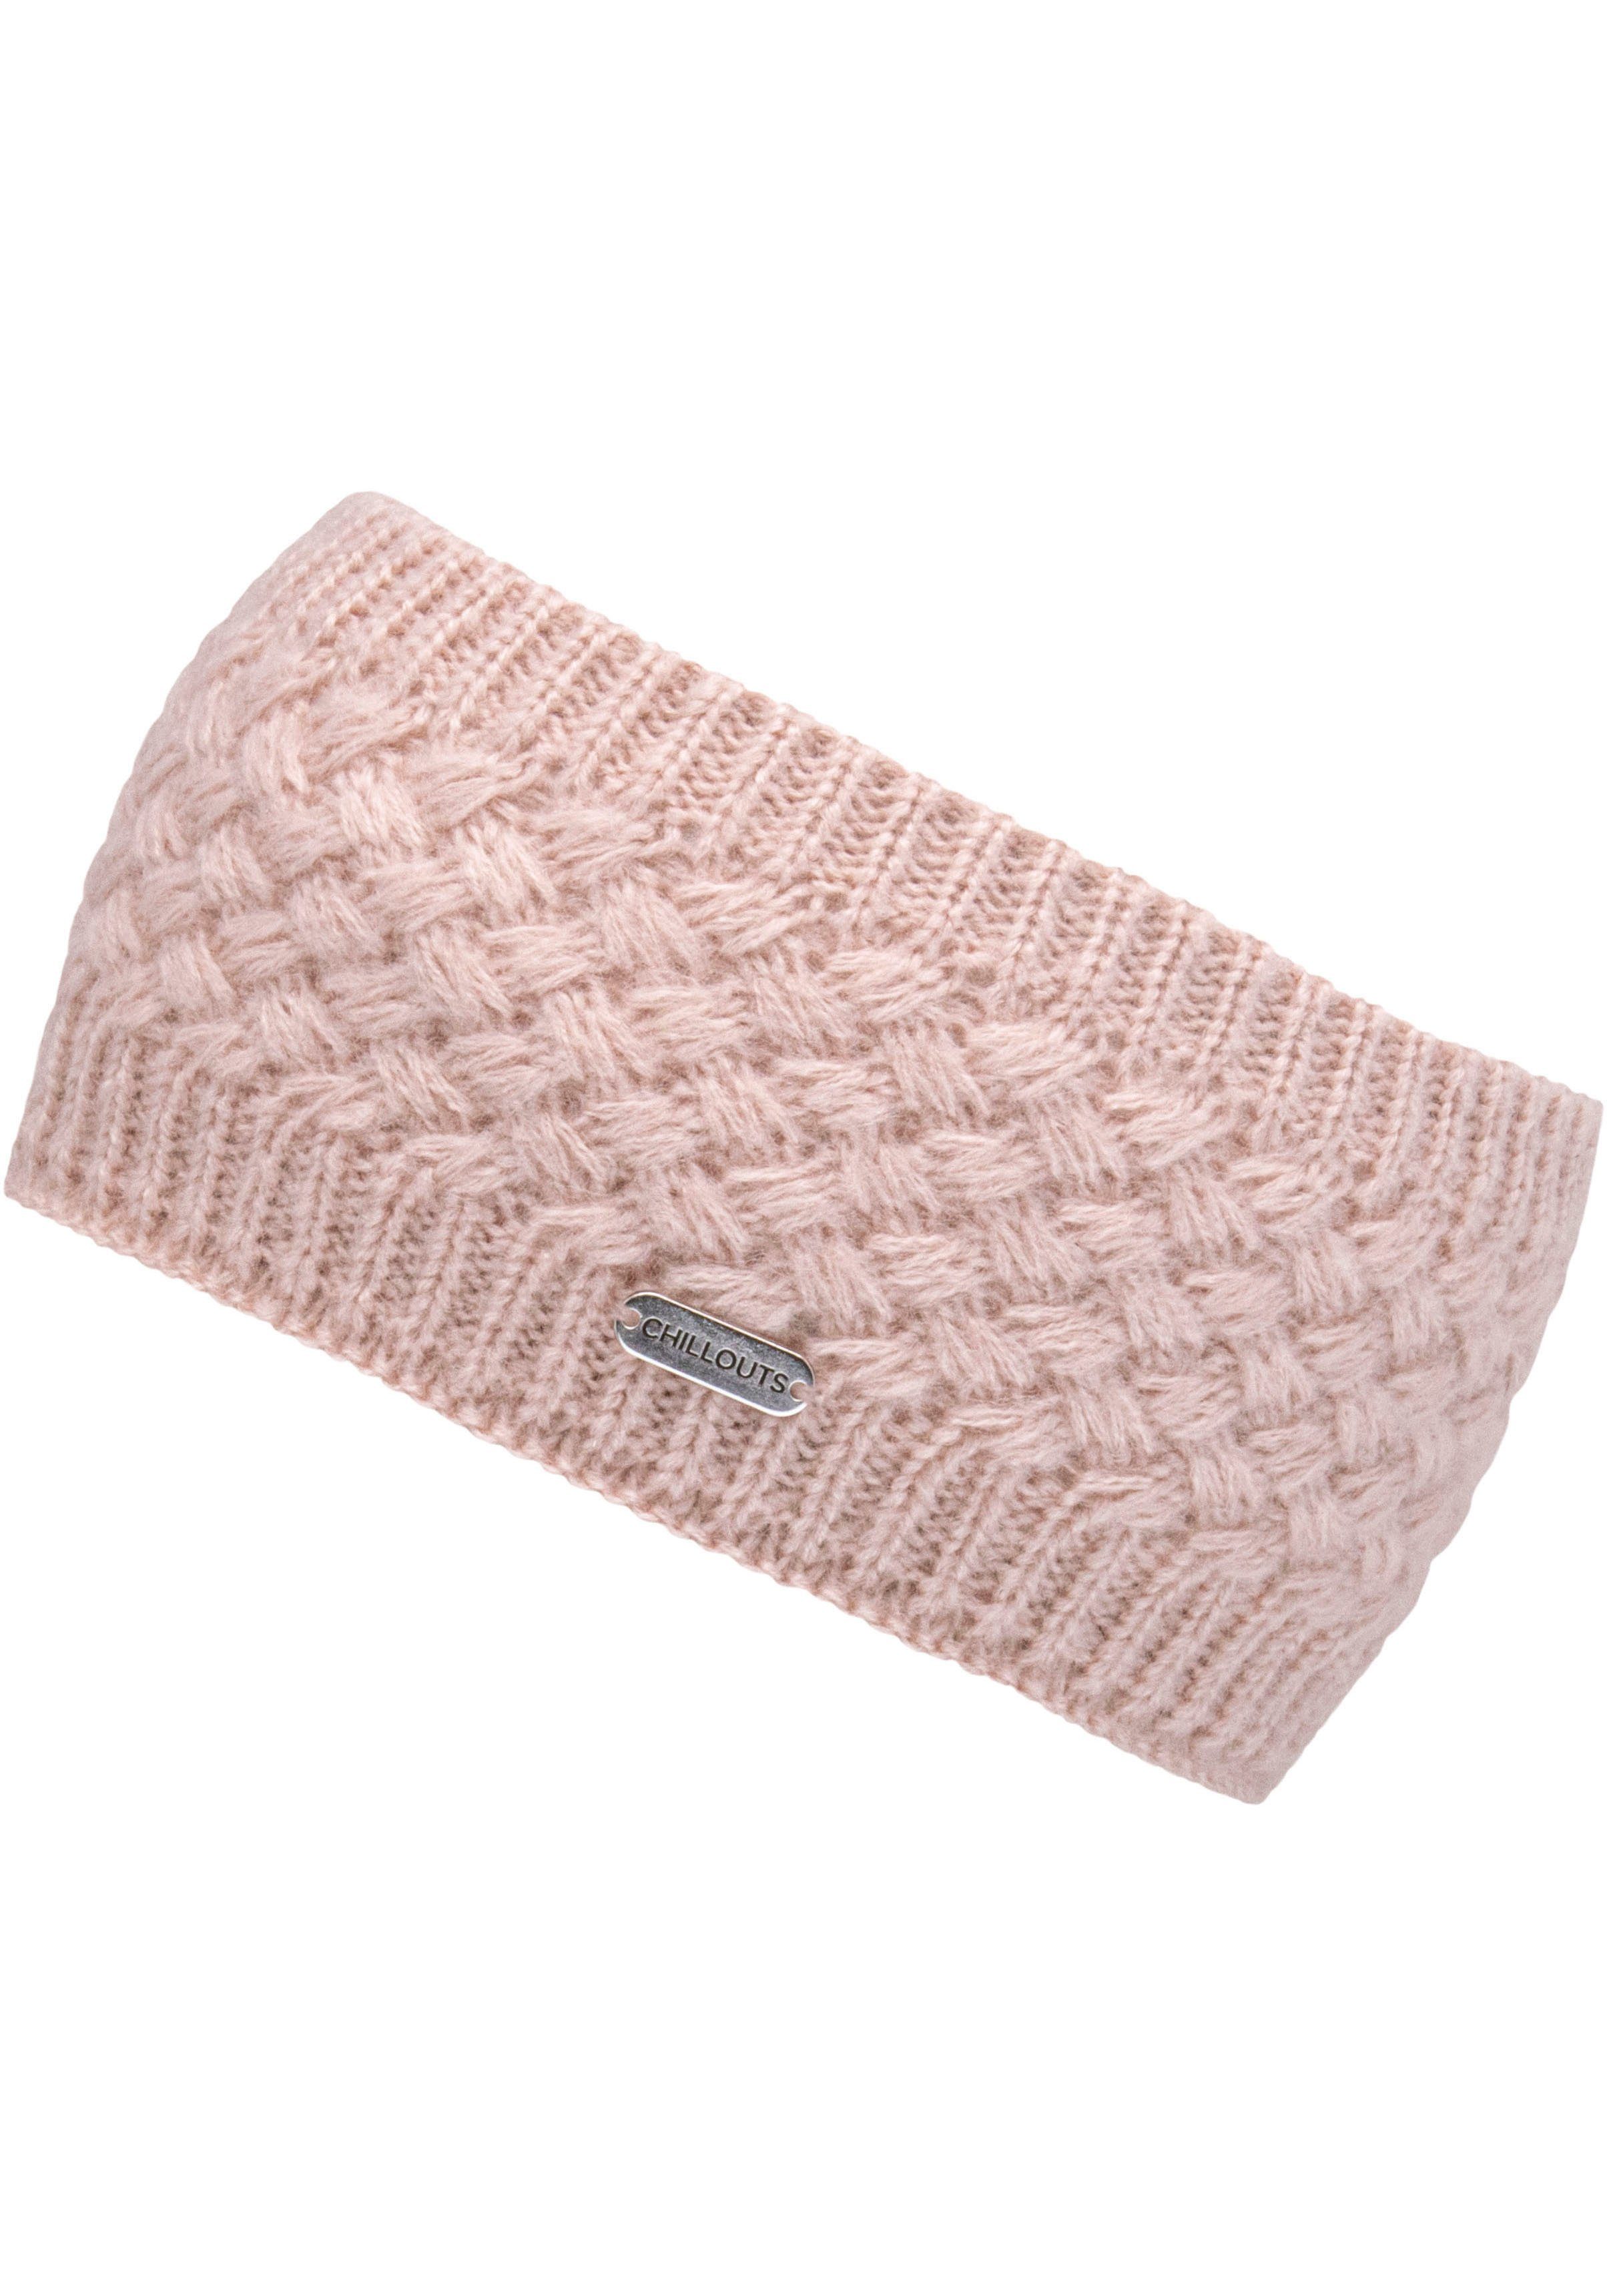 Stirnband Headband chillouts Felicitas Metall-Label rose